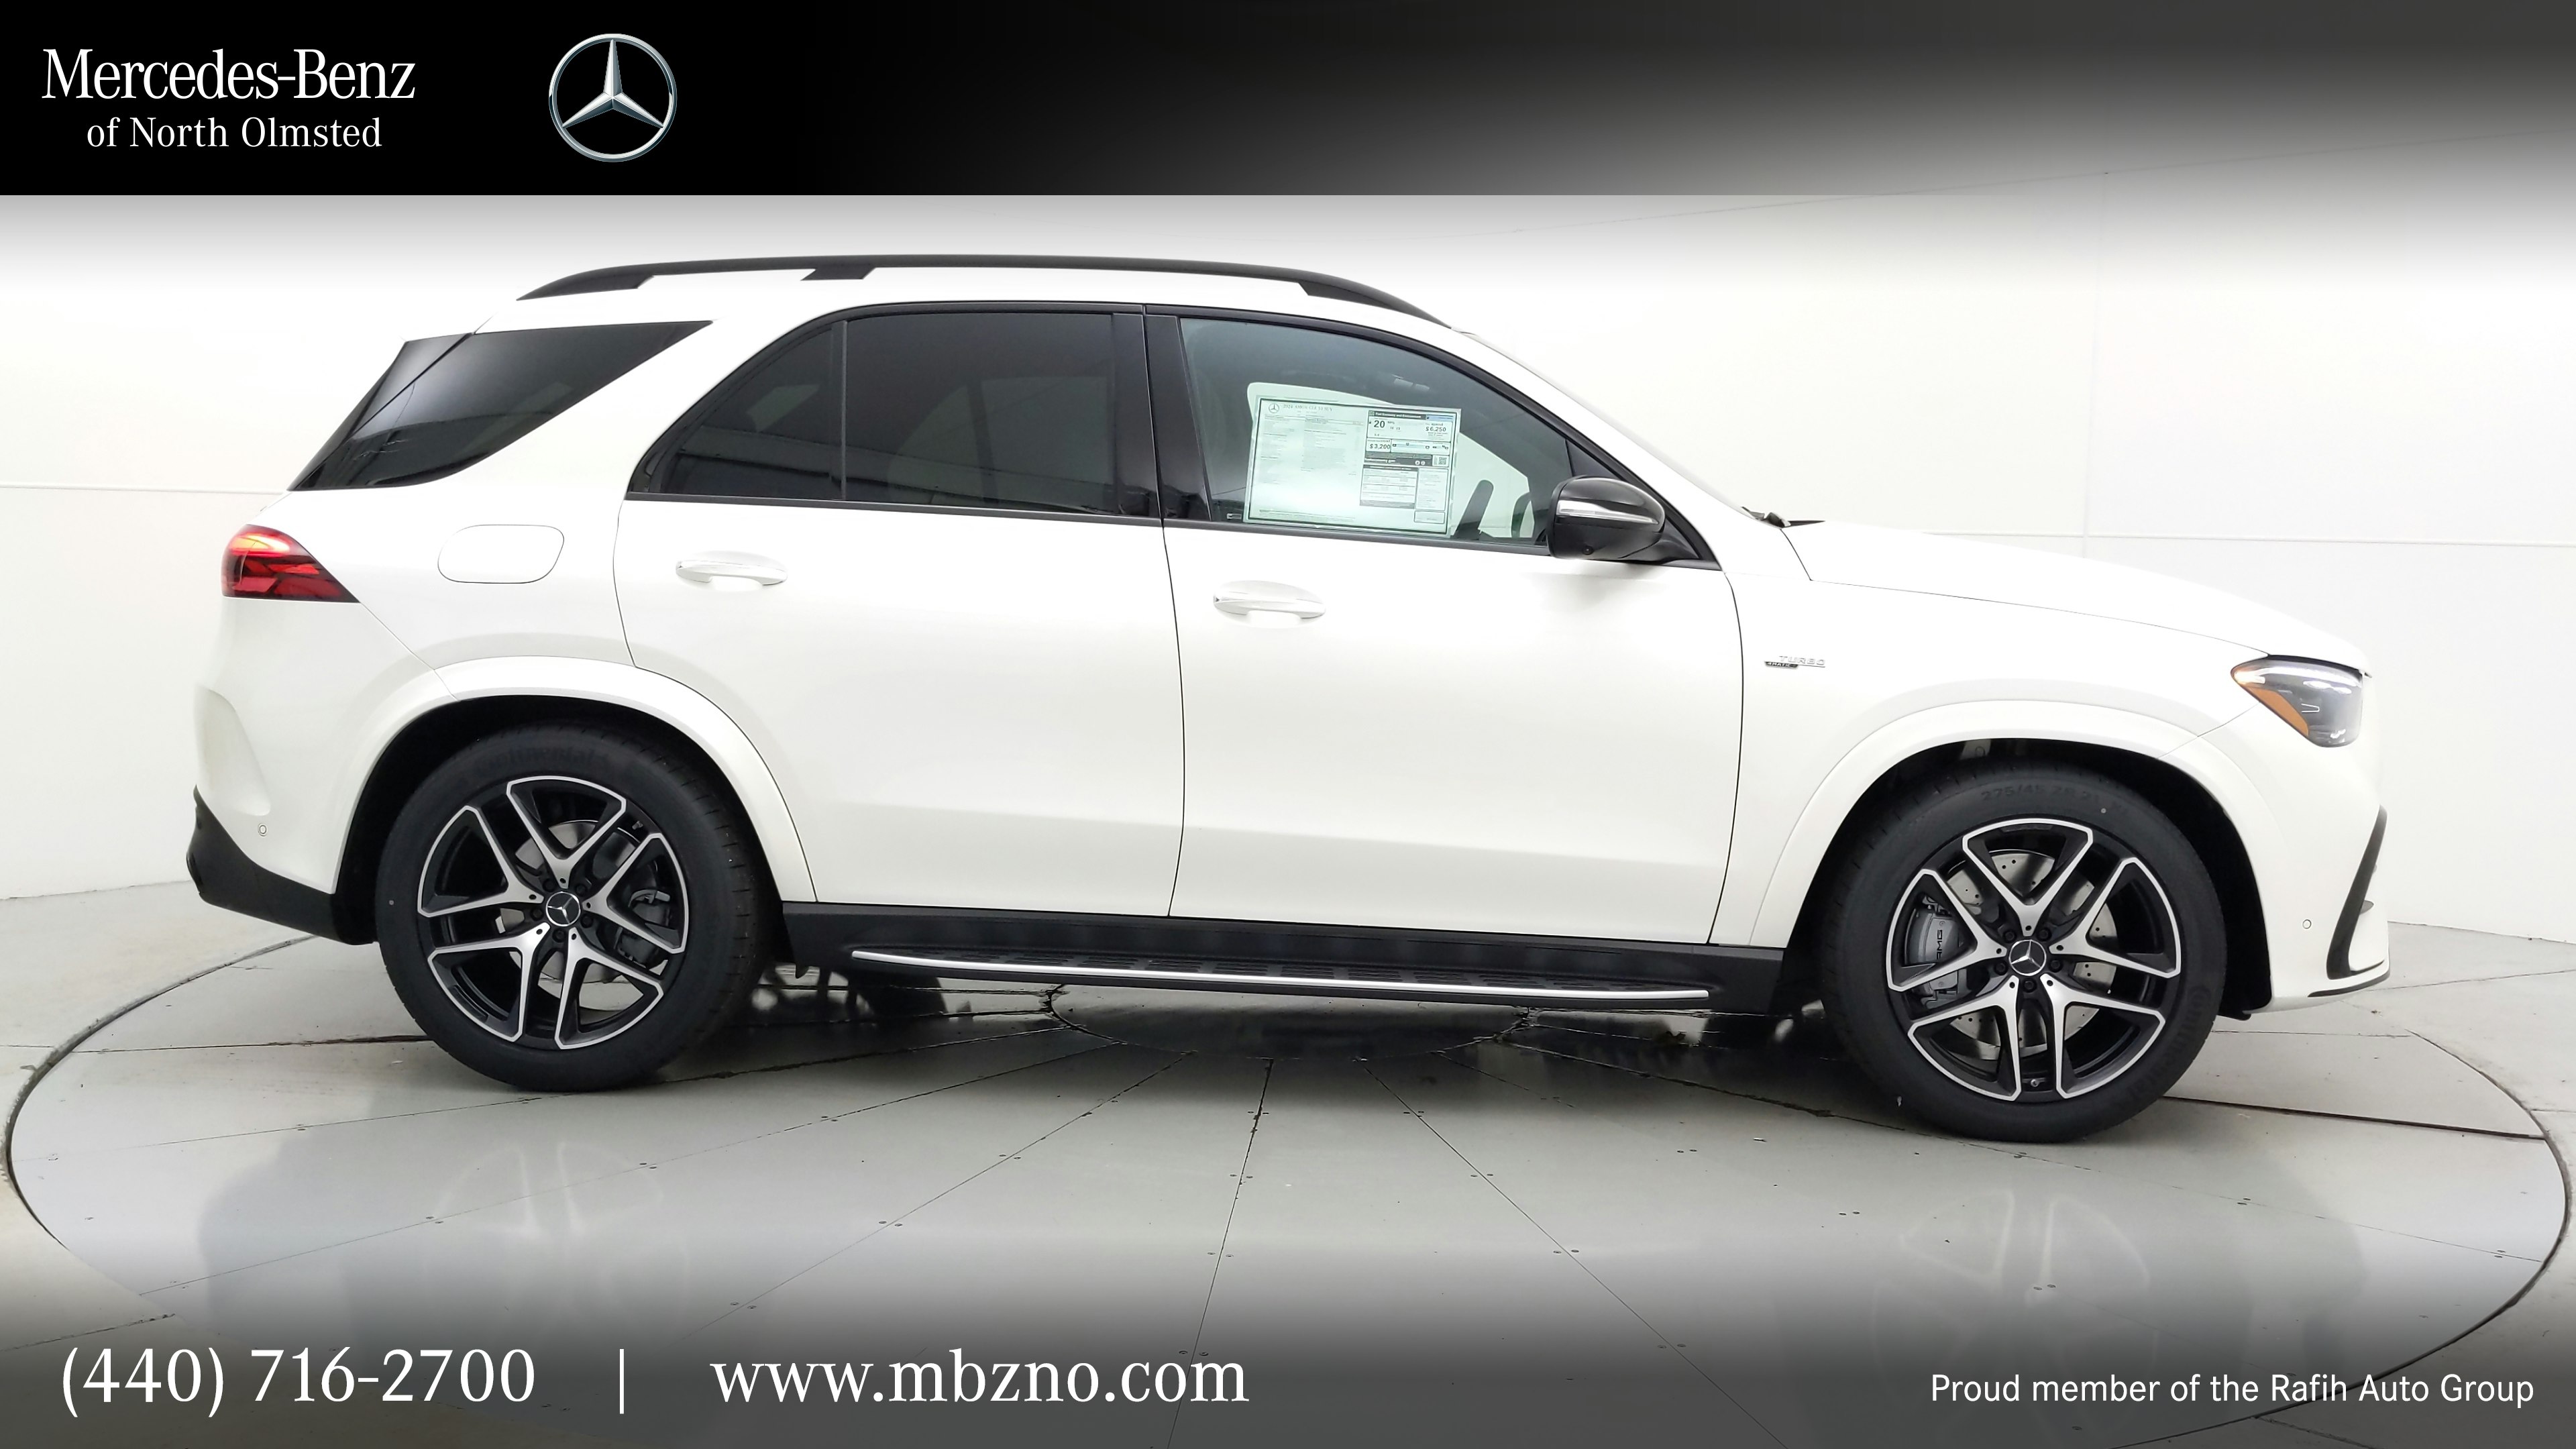 New 2024 Mercedes-Benz GLE GLE53 4-Door Coupe in Oakville #MB24030